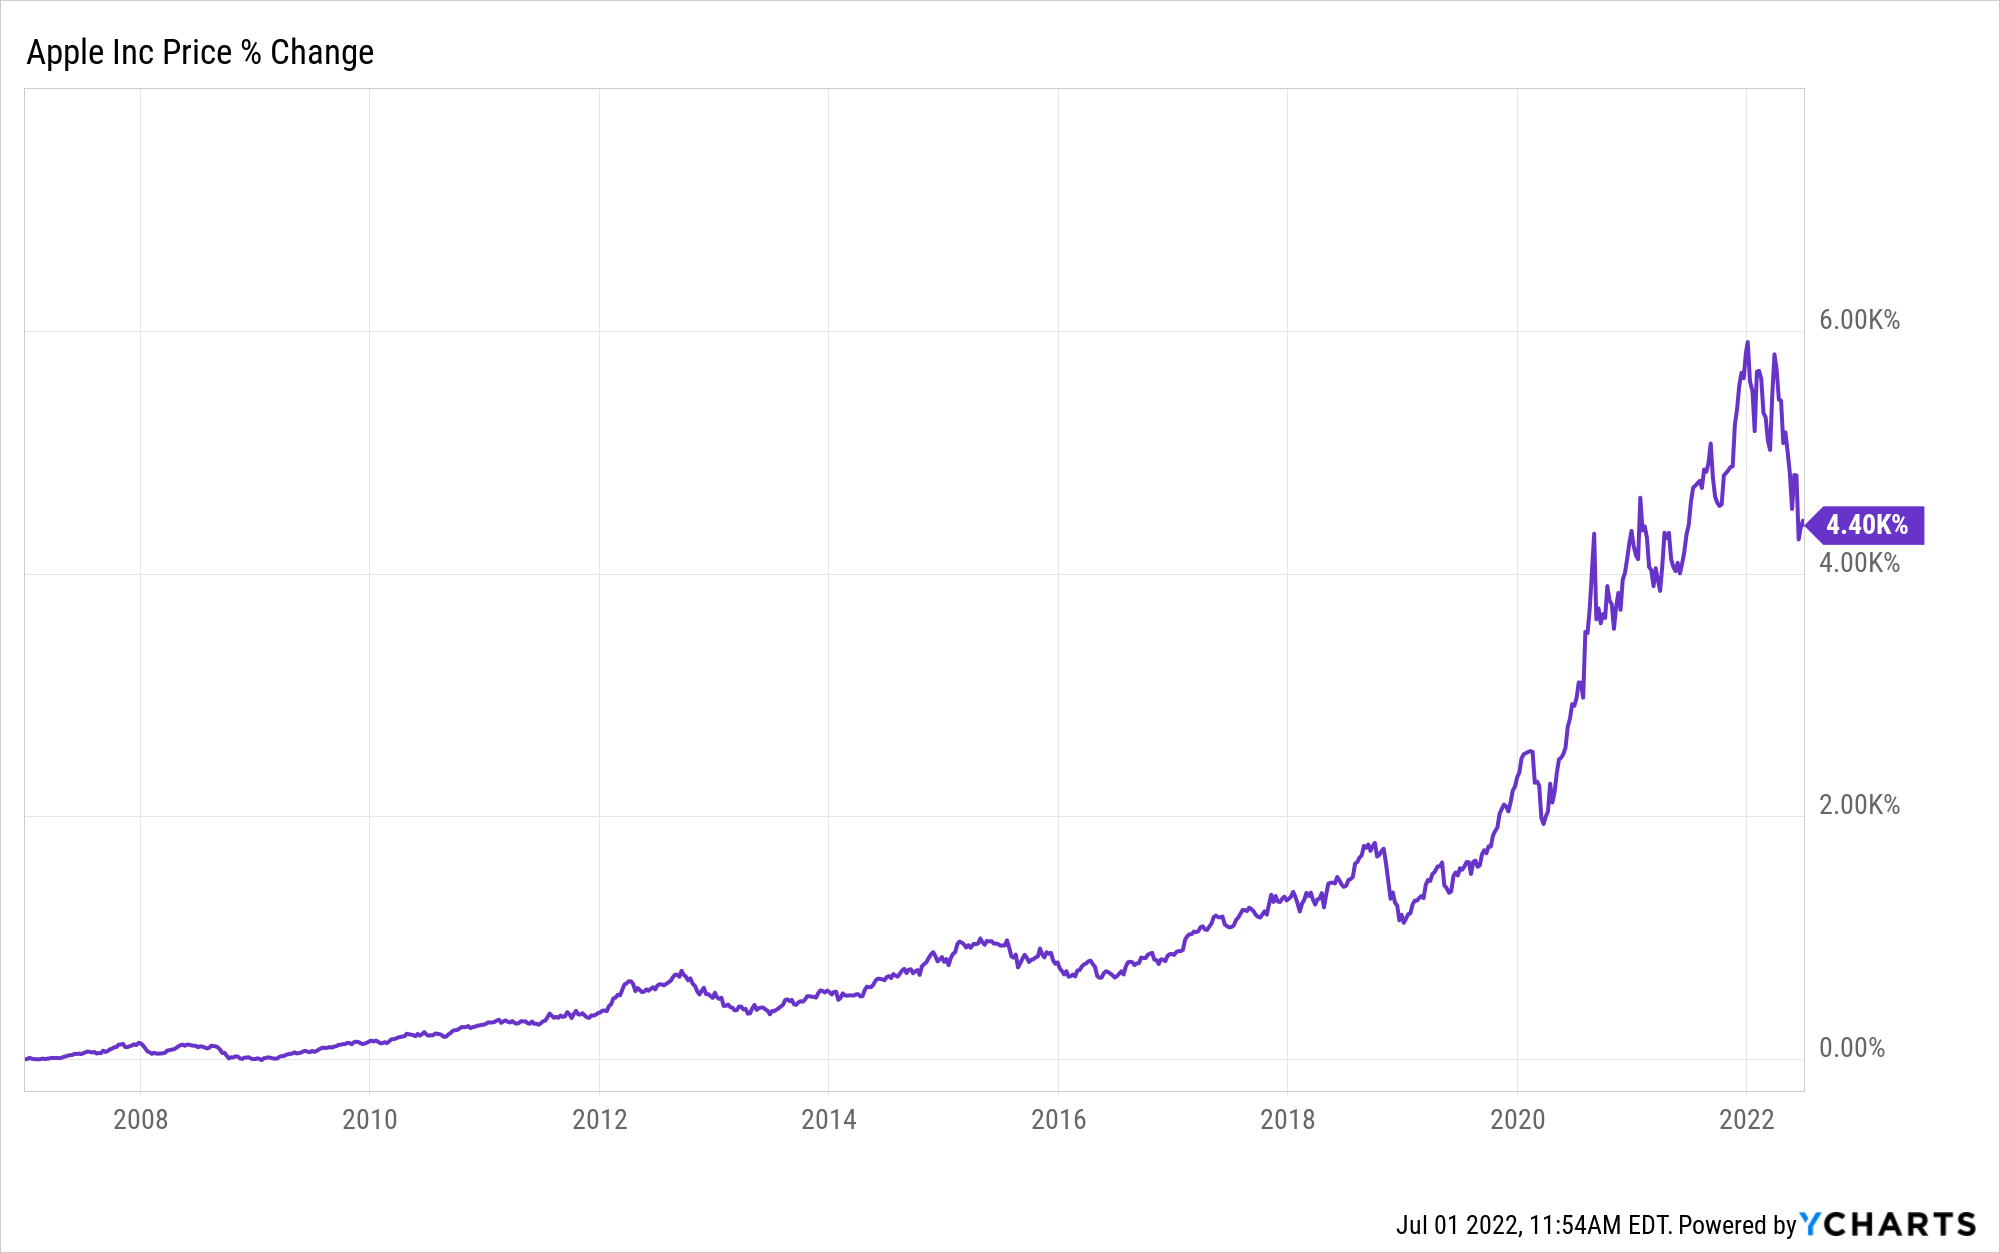 A graph depicting the percent change of Apple stock price from 2007 to 2022